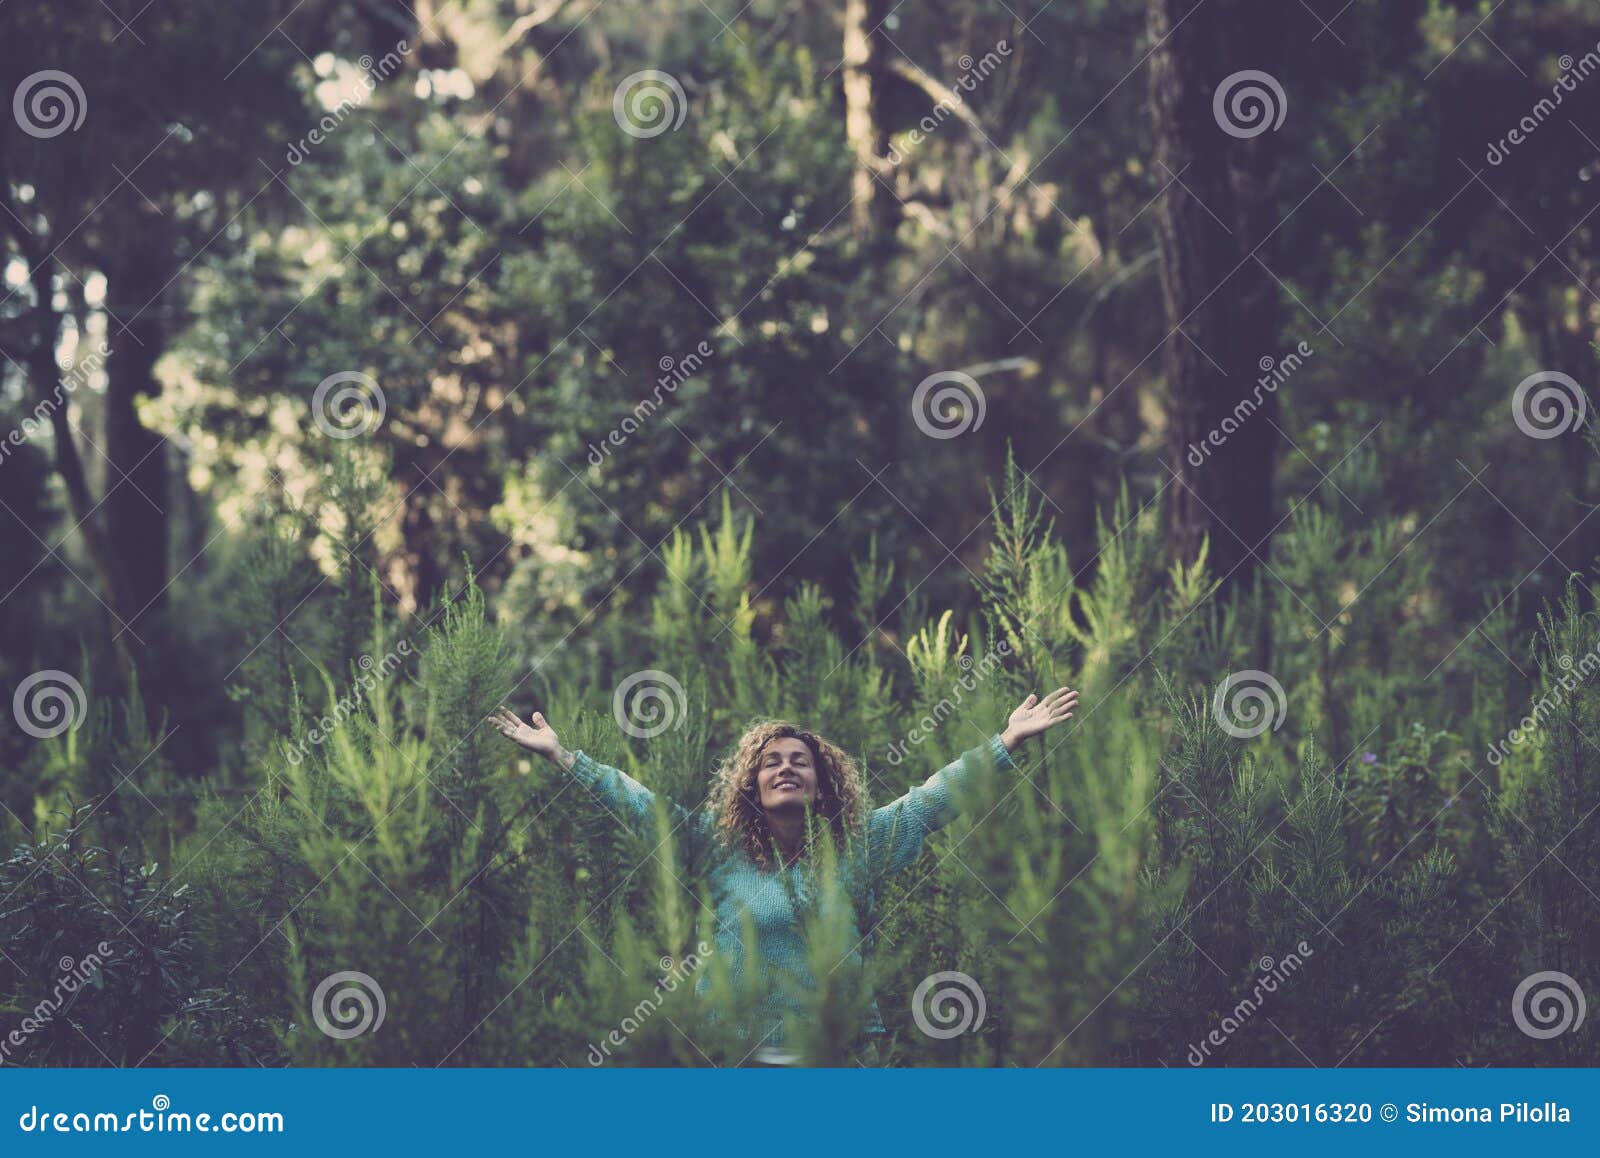 Embracing Outdoor and Love Nature Concept with Happy Beautiful Woman in